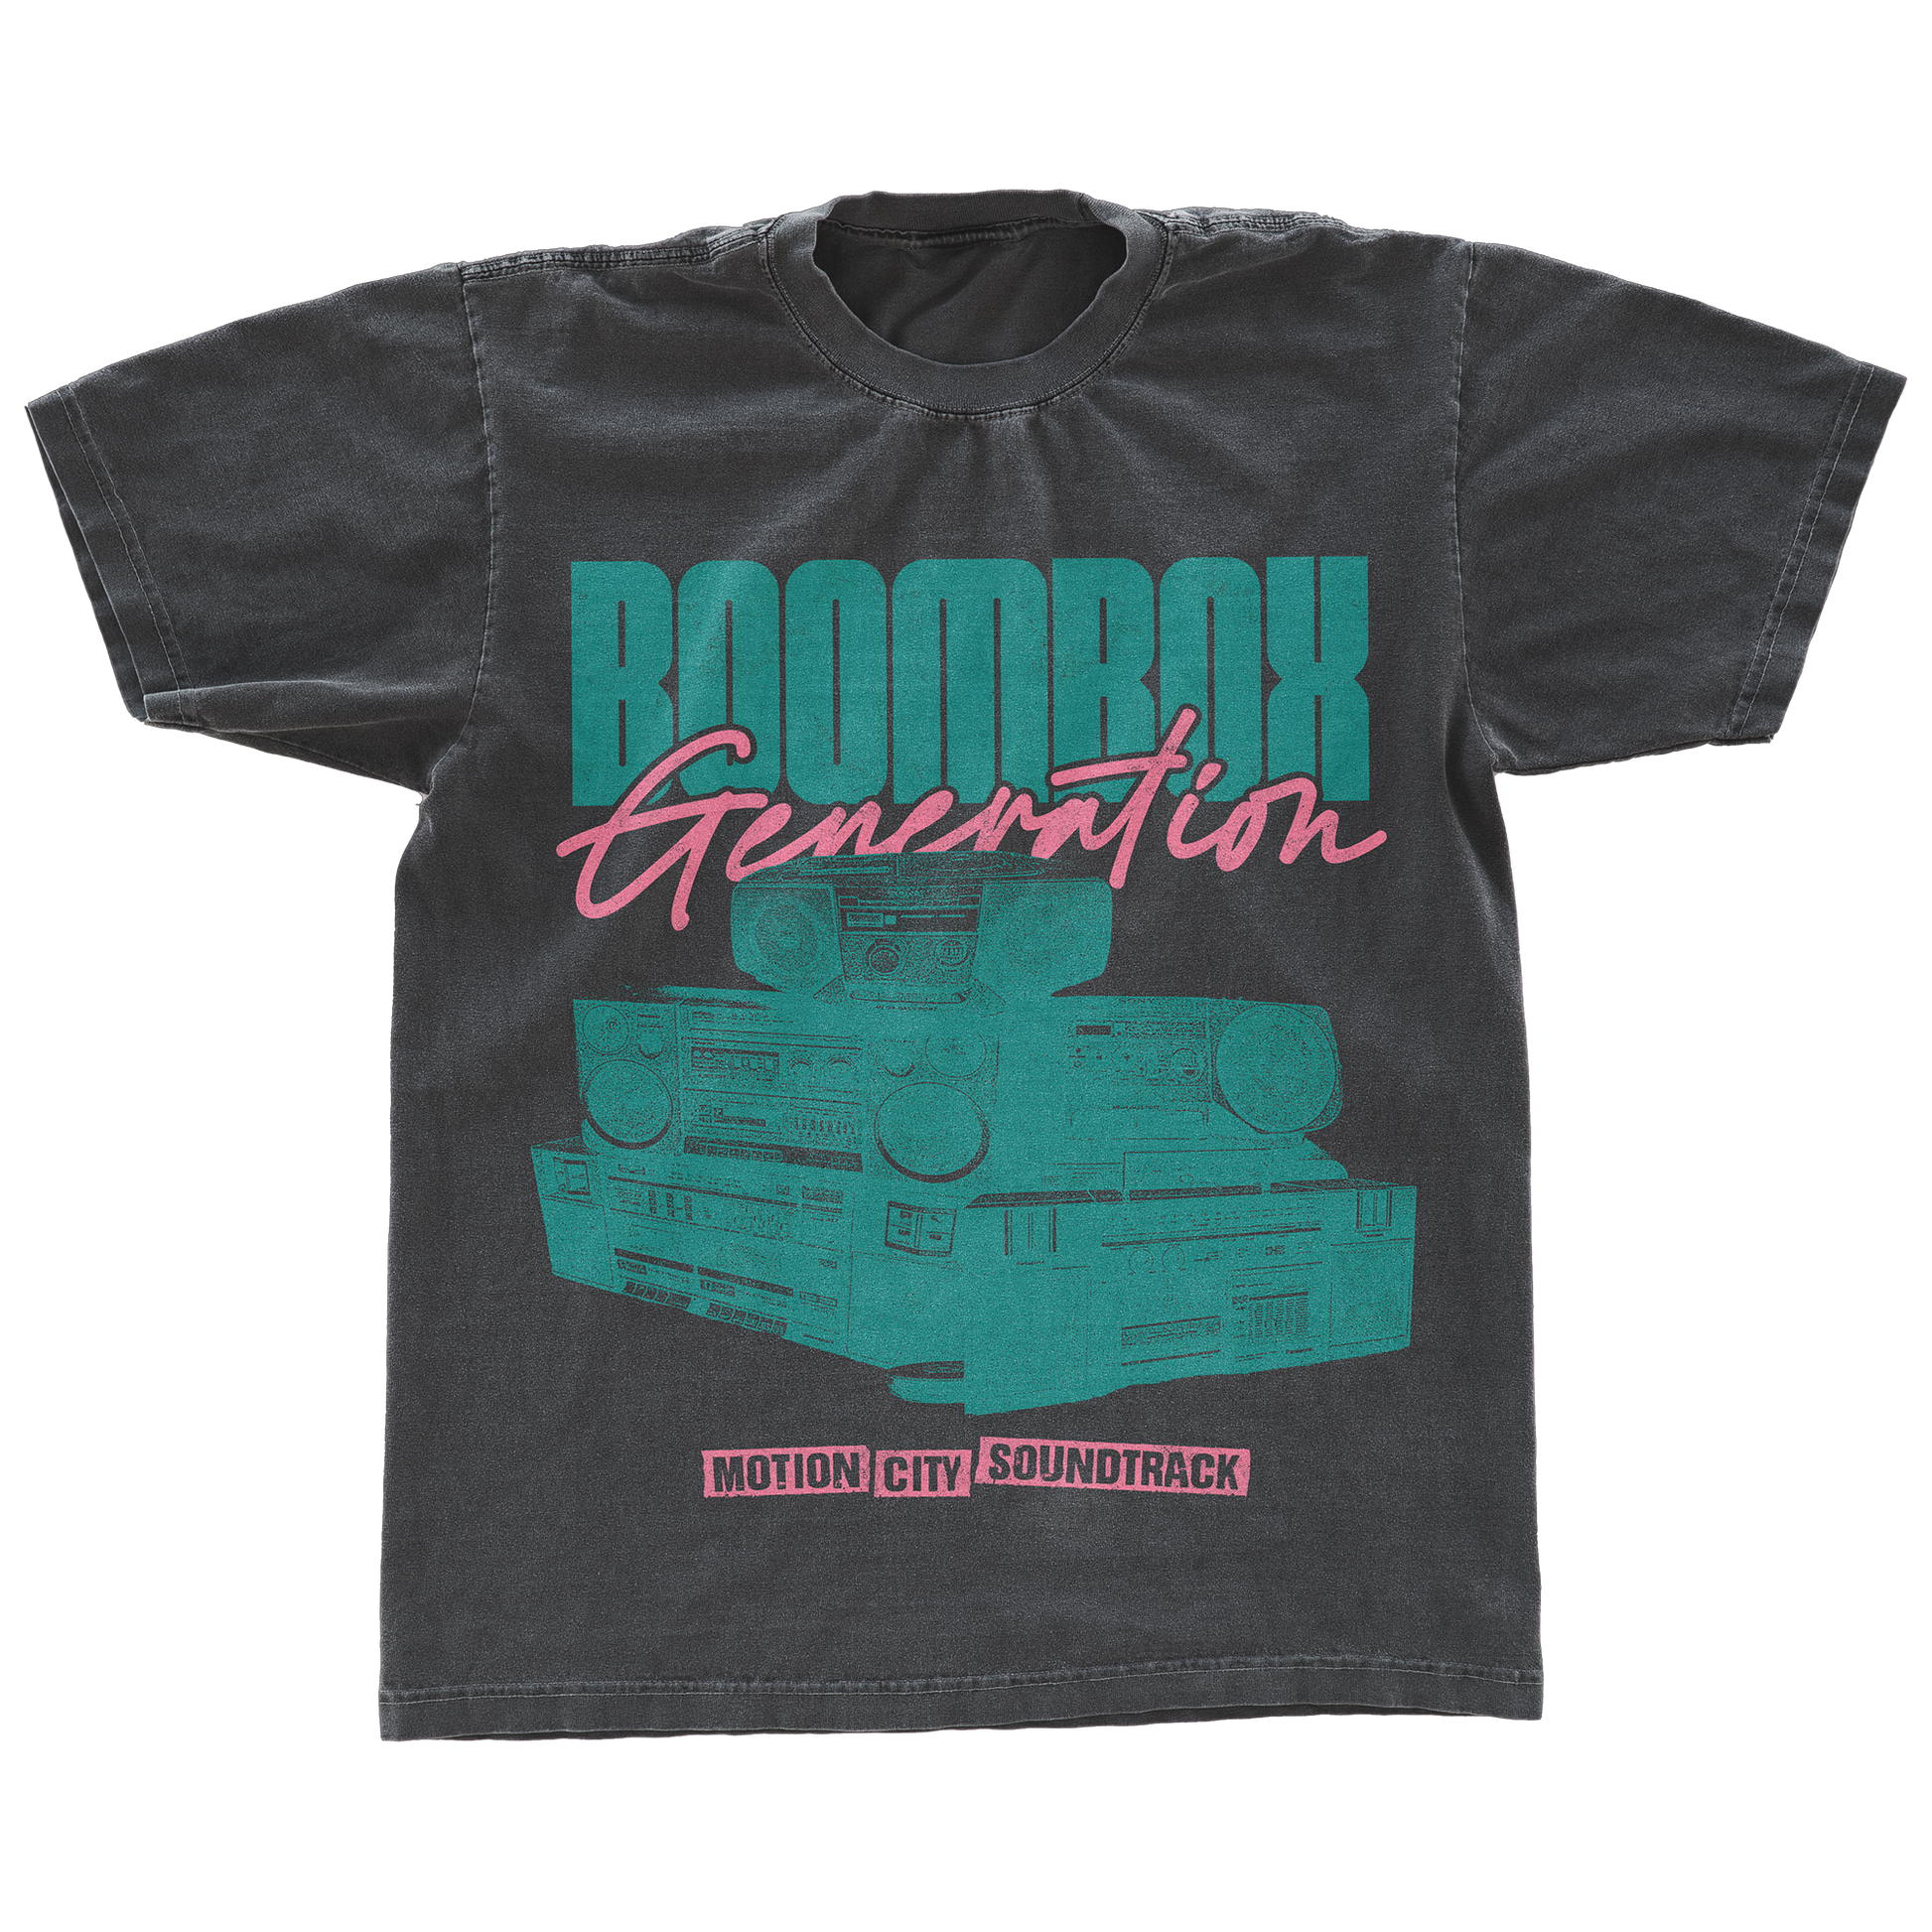 Black tee with teal boombox image, BOOMBOX in teal lettering, GENERATION in pink lettering, MOTION CITY SOUNDTRACK in black lettering with pink background.